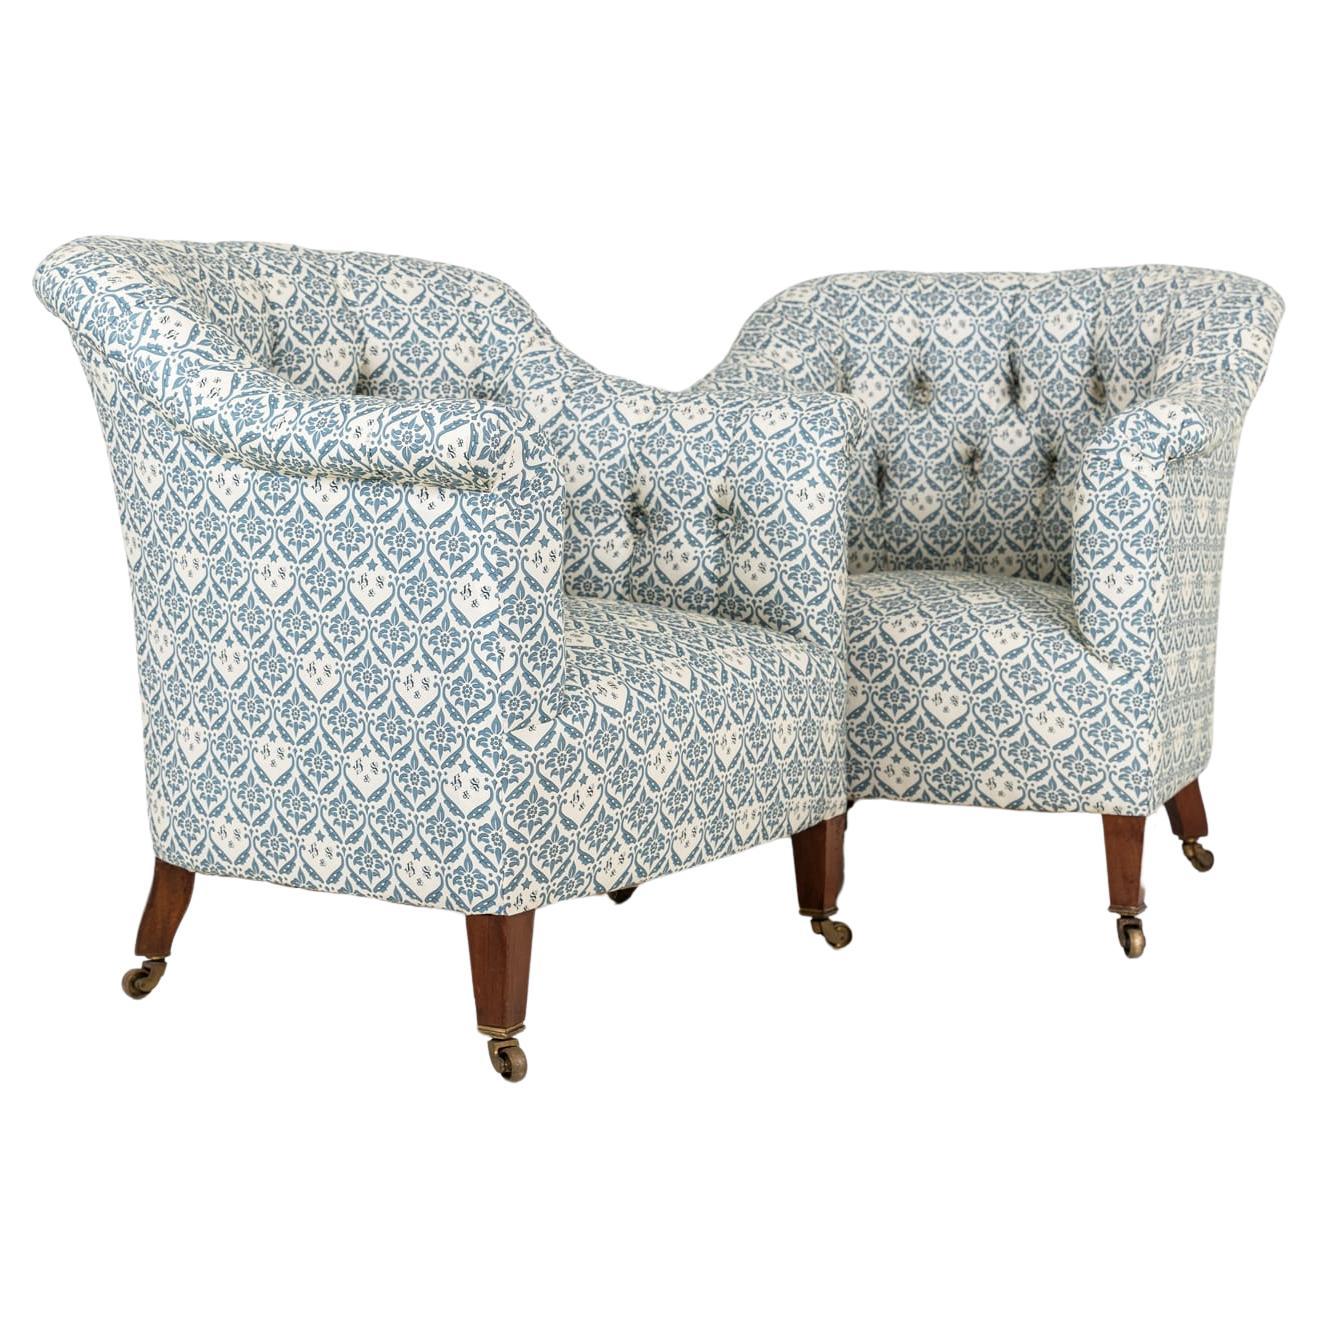 Pair of Antique Howard & Sons 'Pickwell' Country House Armchairs, circa 1920